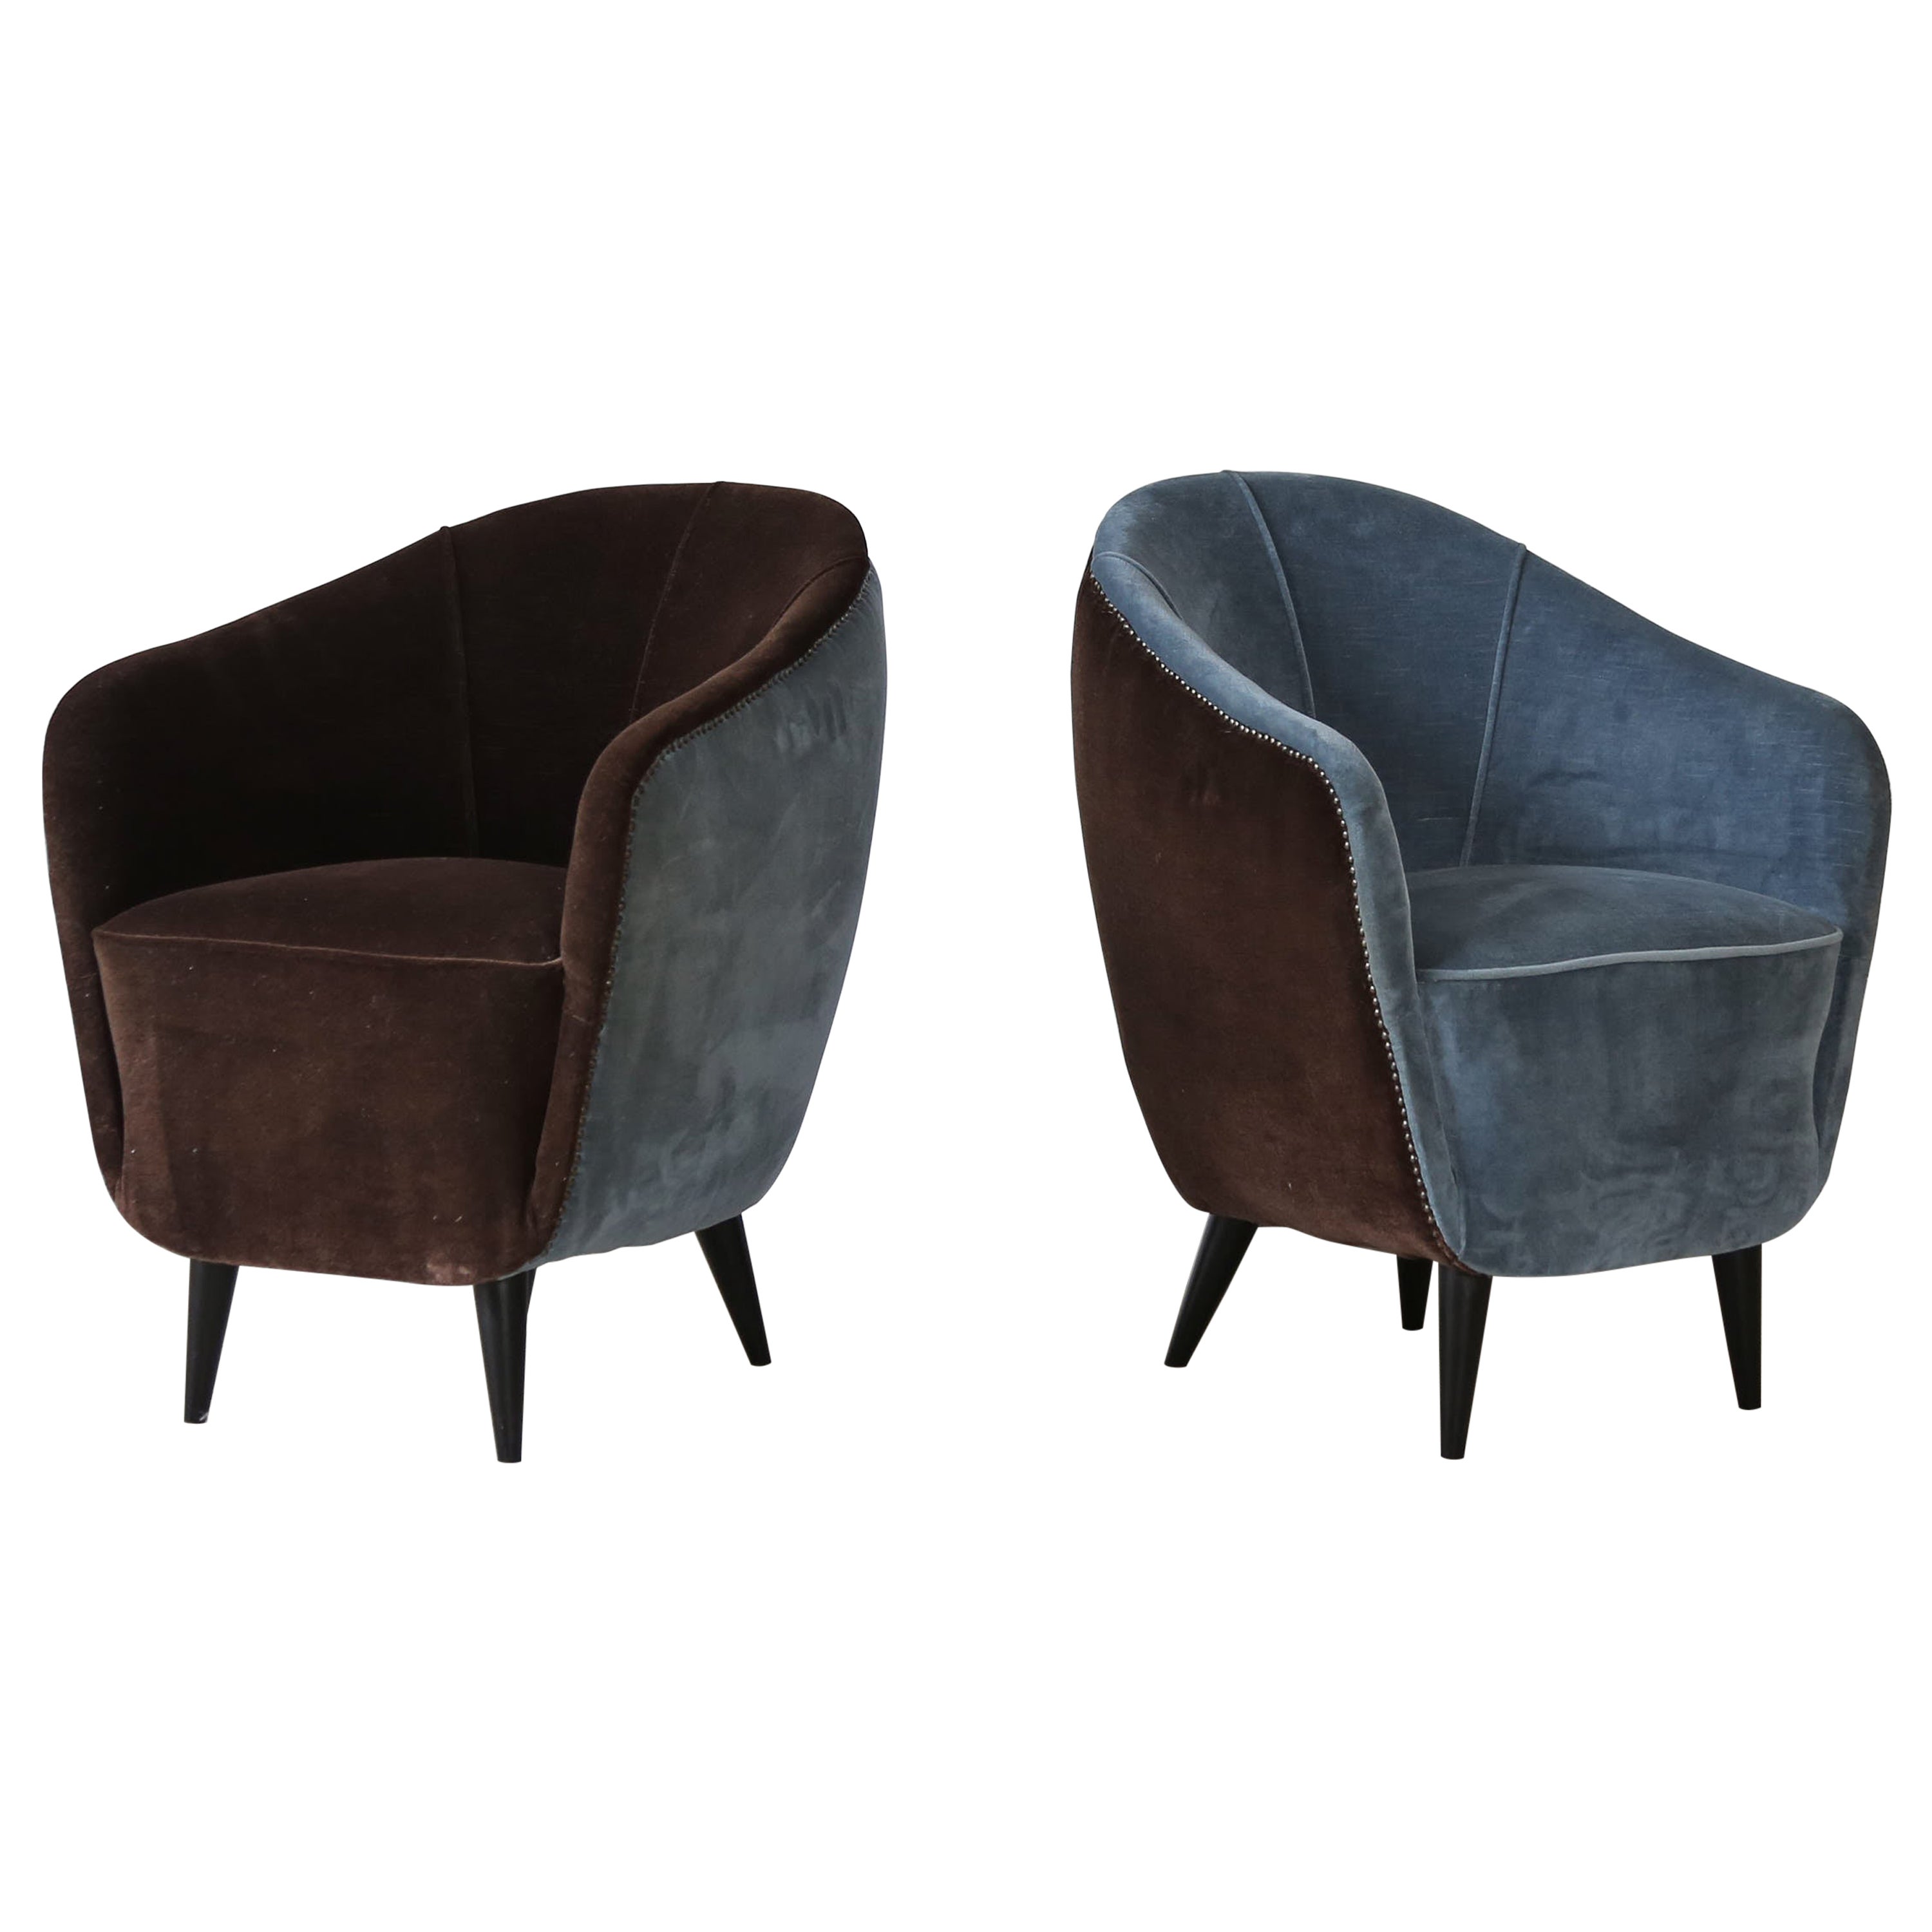 Pair of Gio Ponti Style Chairs, Italy, 1960s